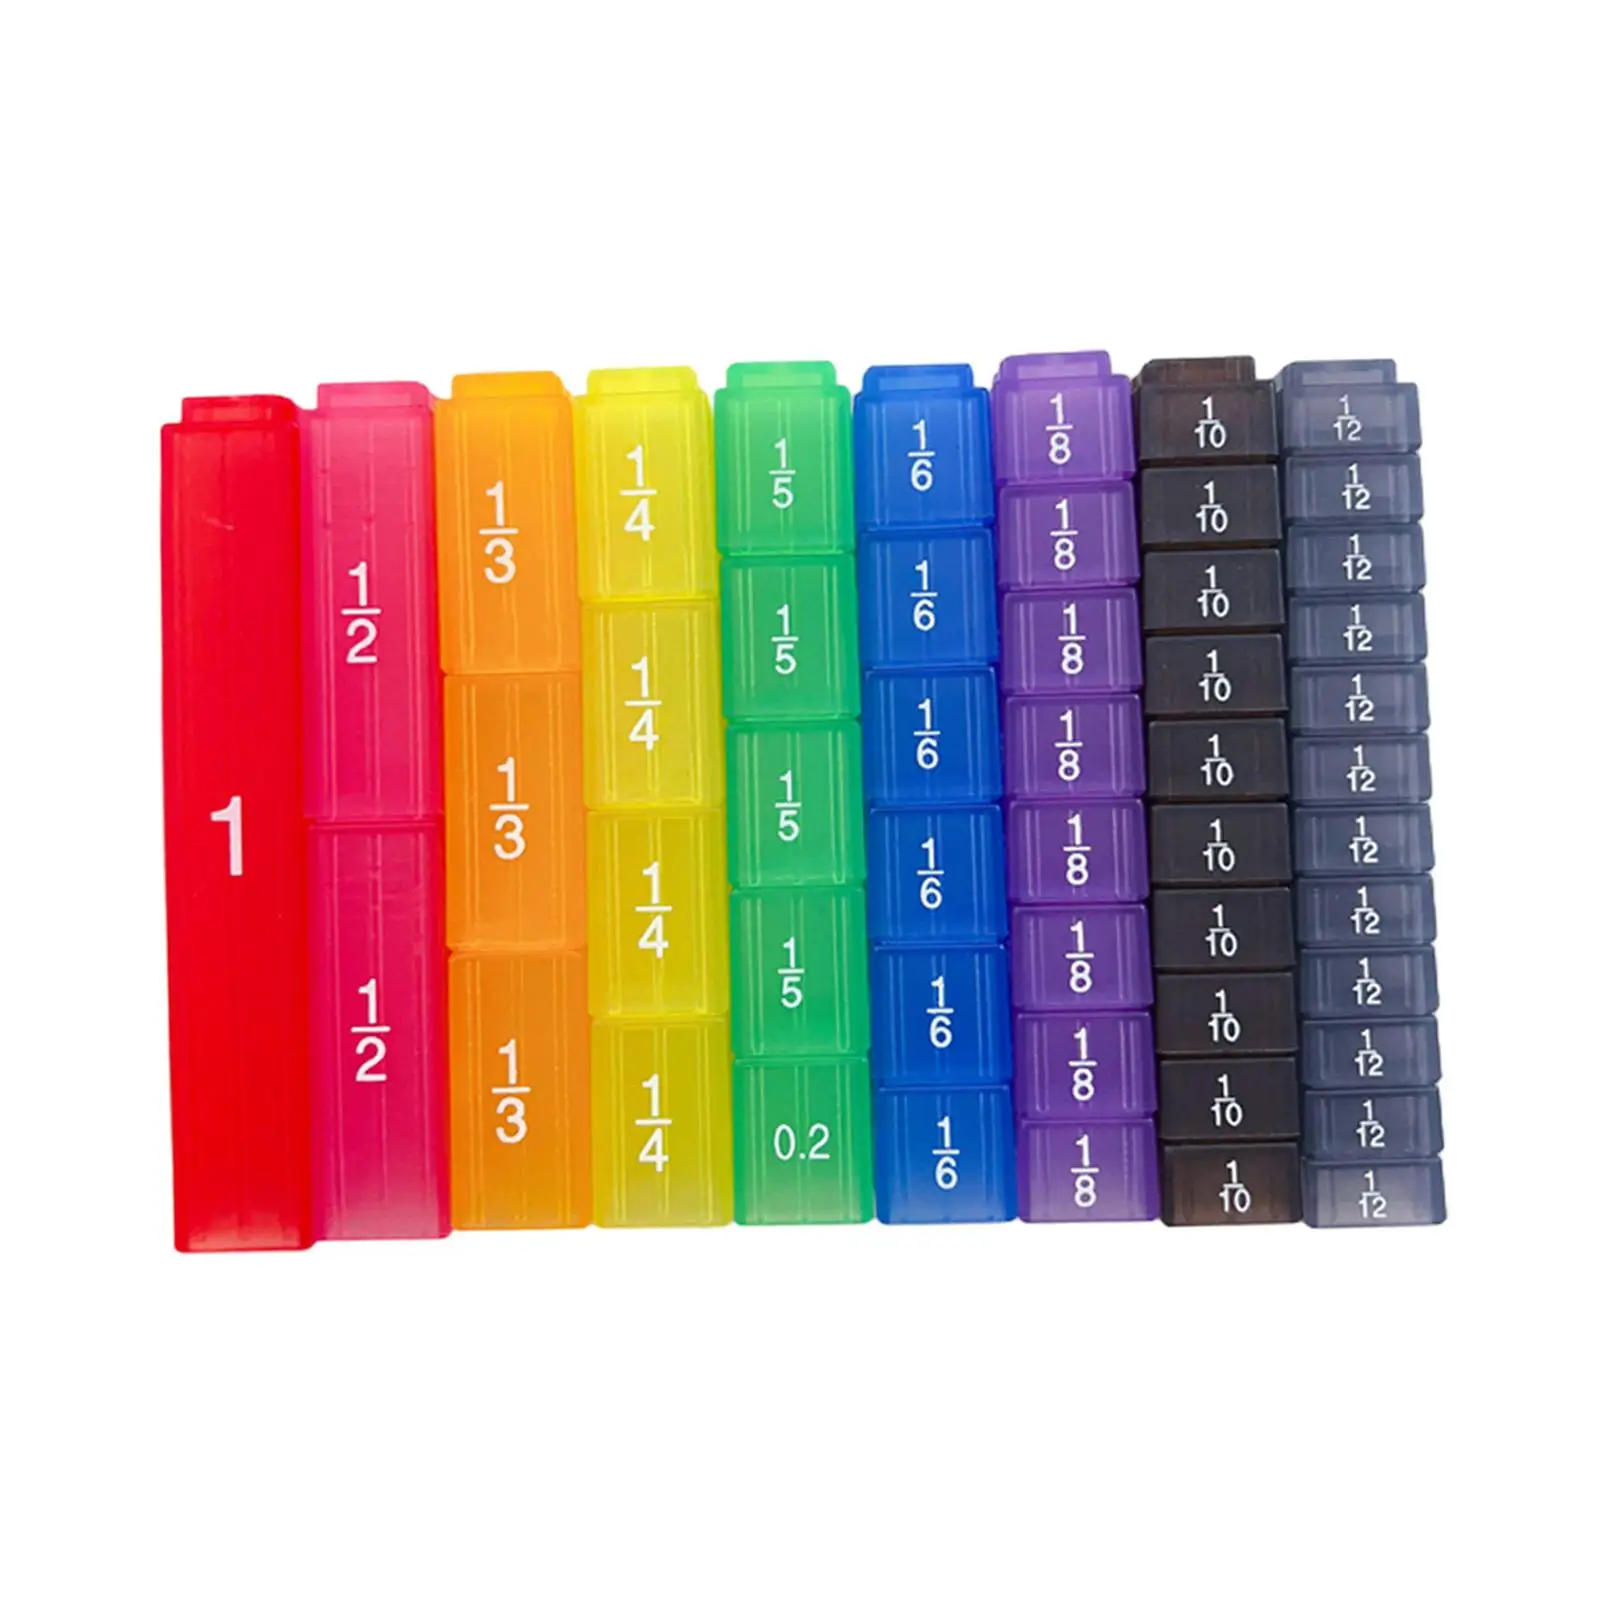 Fraction Cubes Blocks Fraction Blocks Colorful Fraction Cubes Learn Fraction Equivalence Math Education for Homeschool Supplies